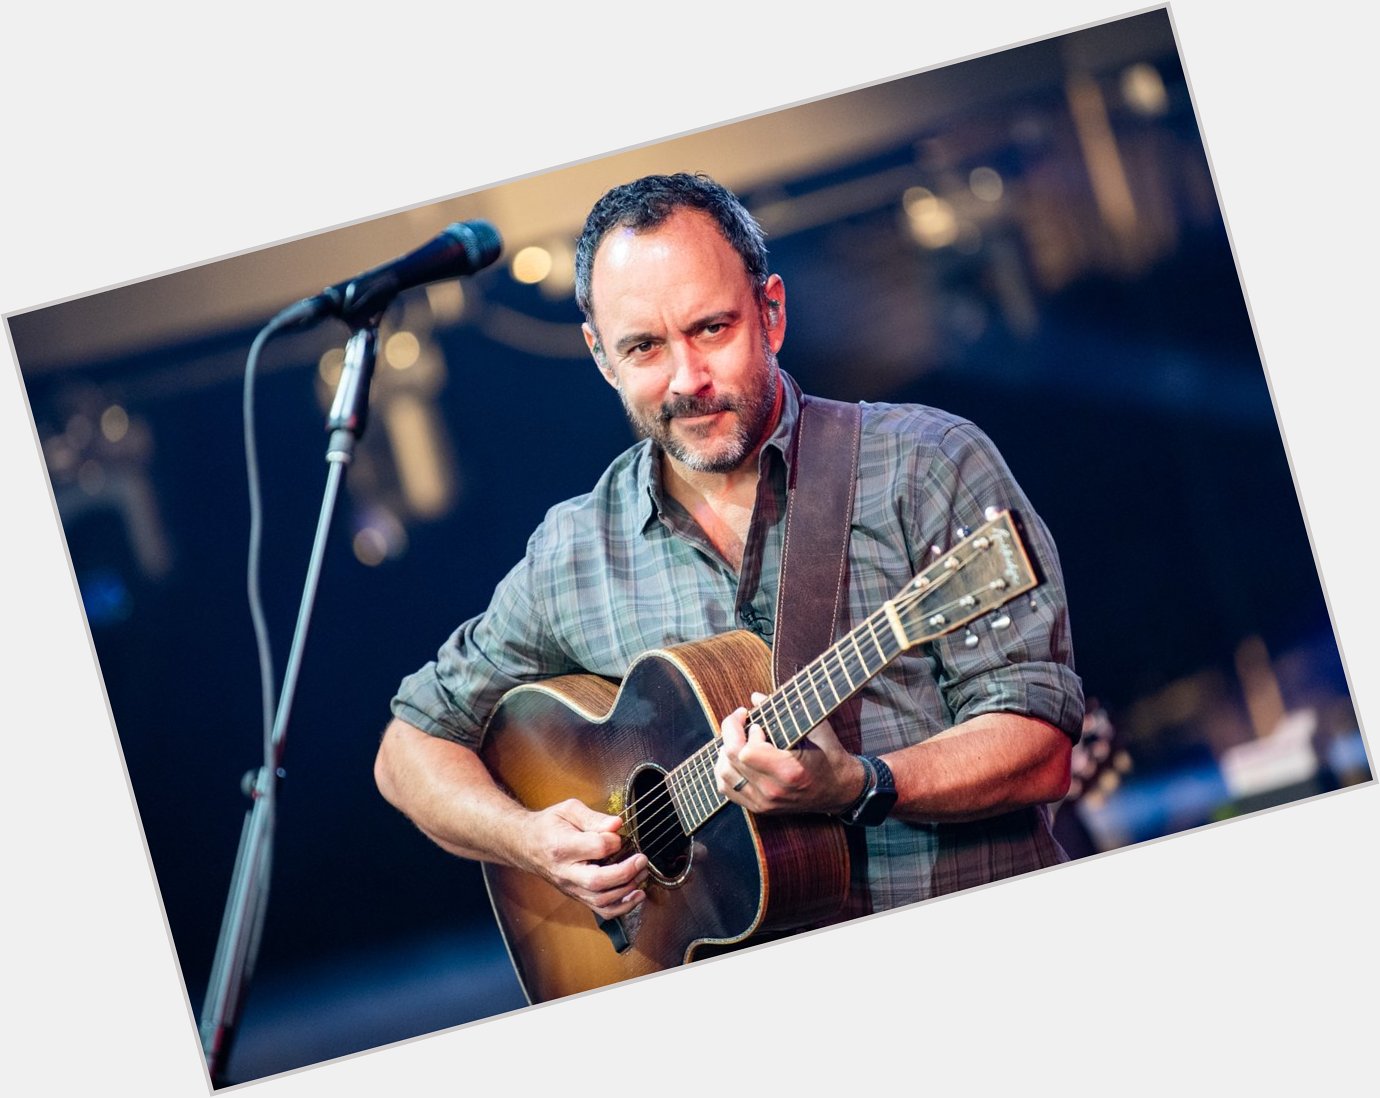 January 9, 1967
Happy birthday to Dave Matthews who is born in Johannesburg, South Africa on this day in 1967. 